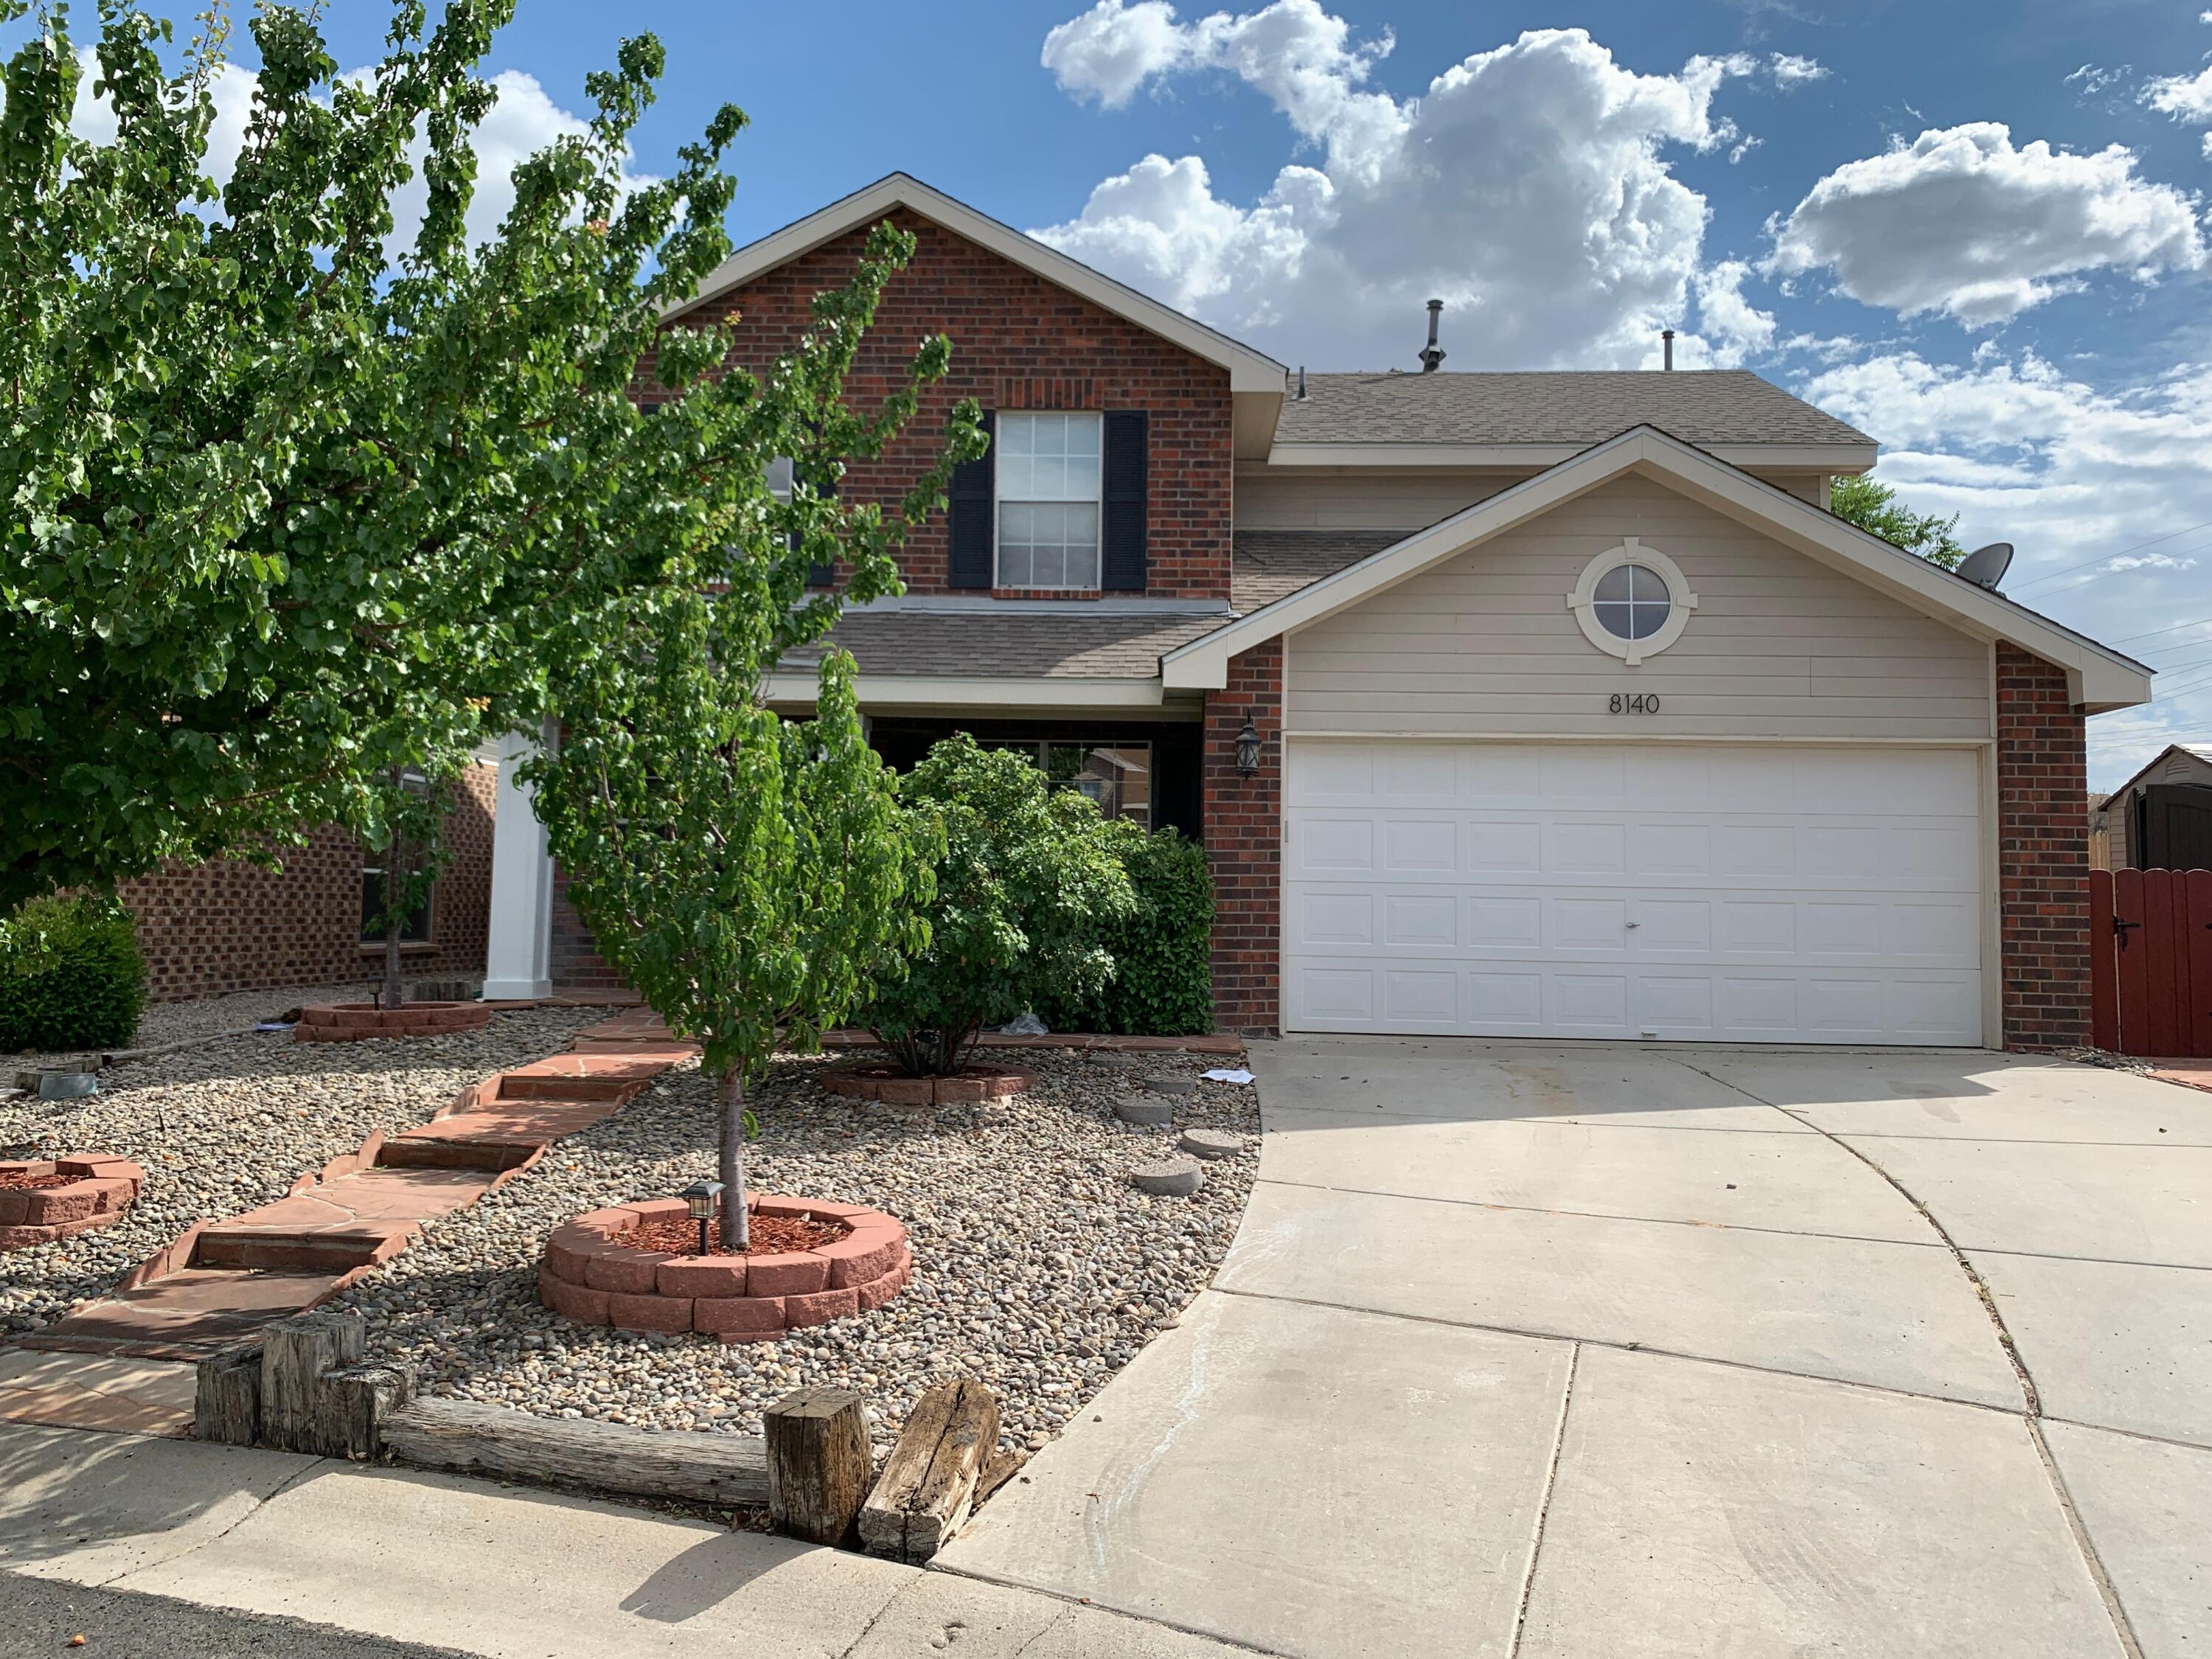 Home is located at the end of the cul-de-sac.  Great open floor plan.  No carpet. Beautiful backyard with a covered patio and a grapevine cover.  Perfect for entertaining inside and out!